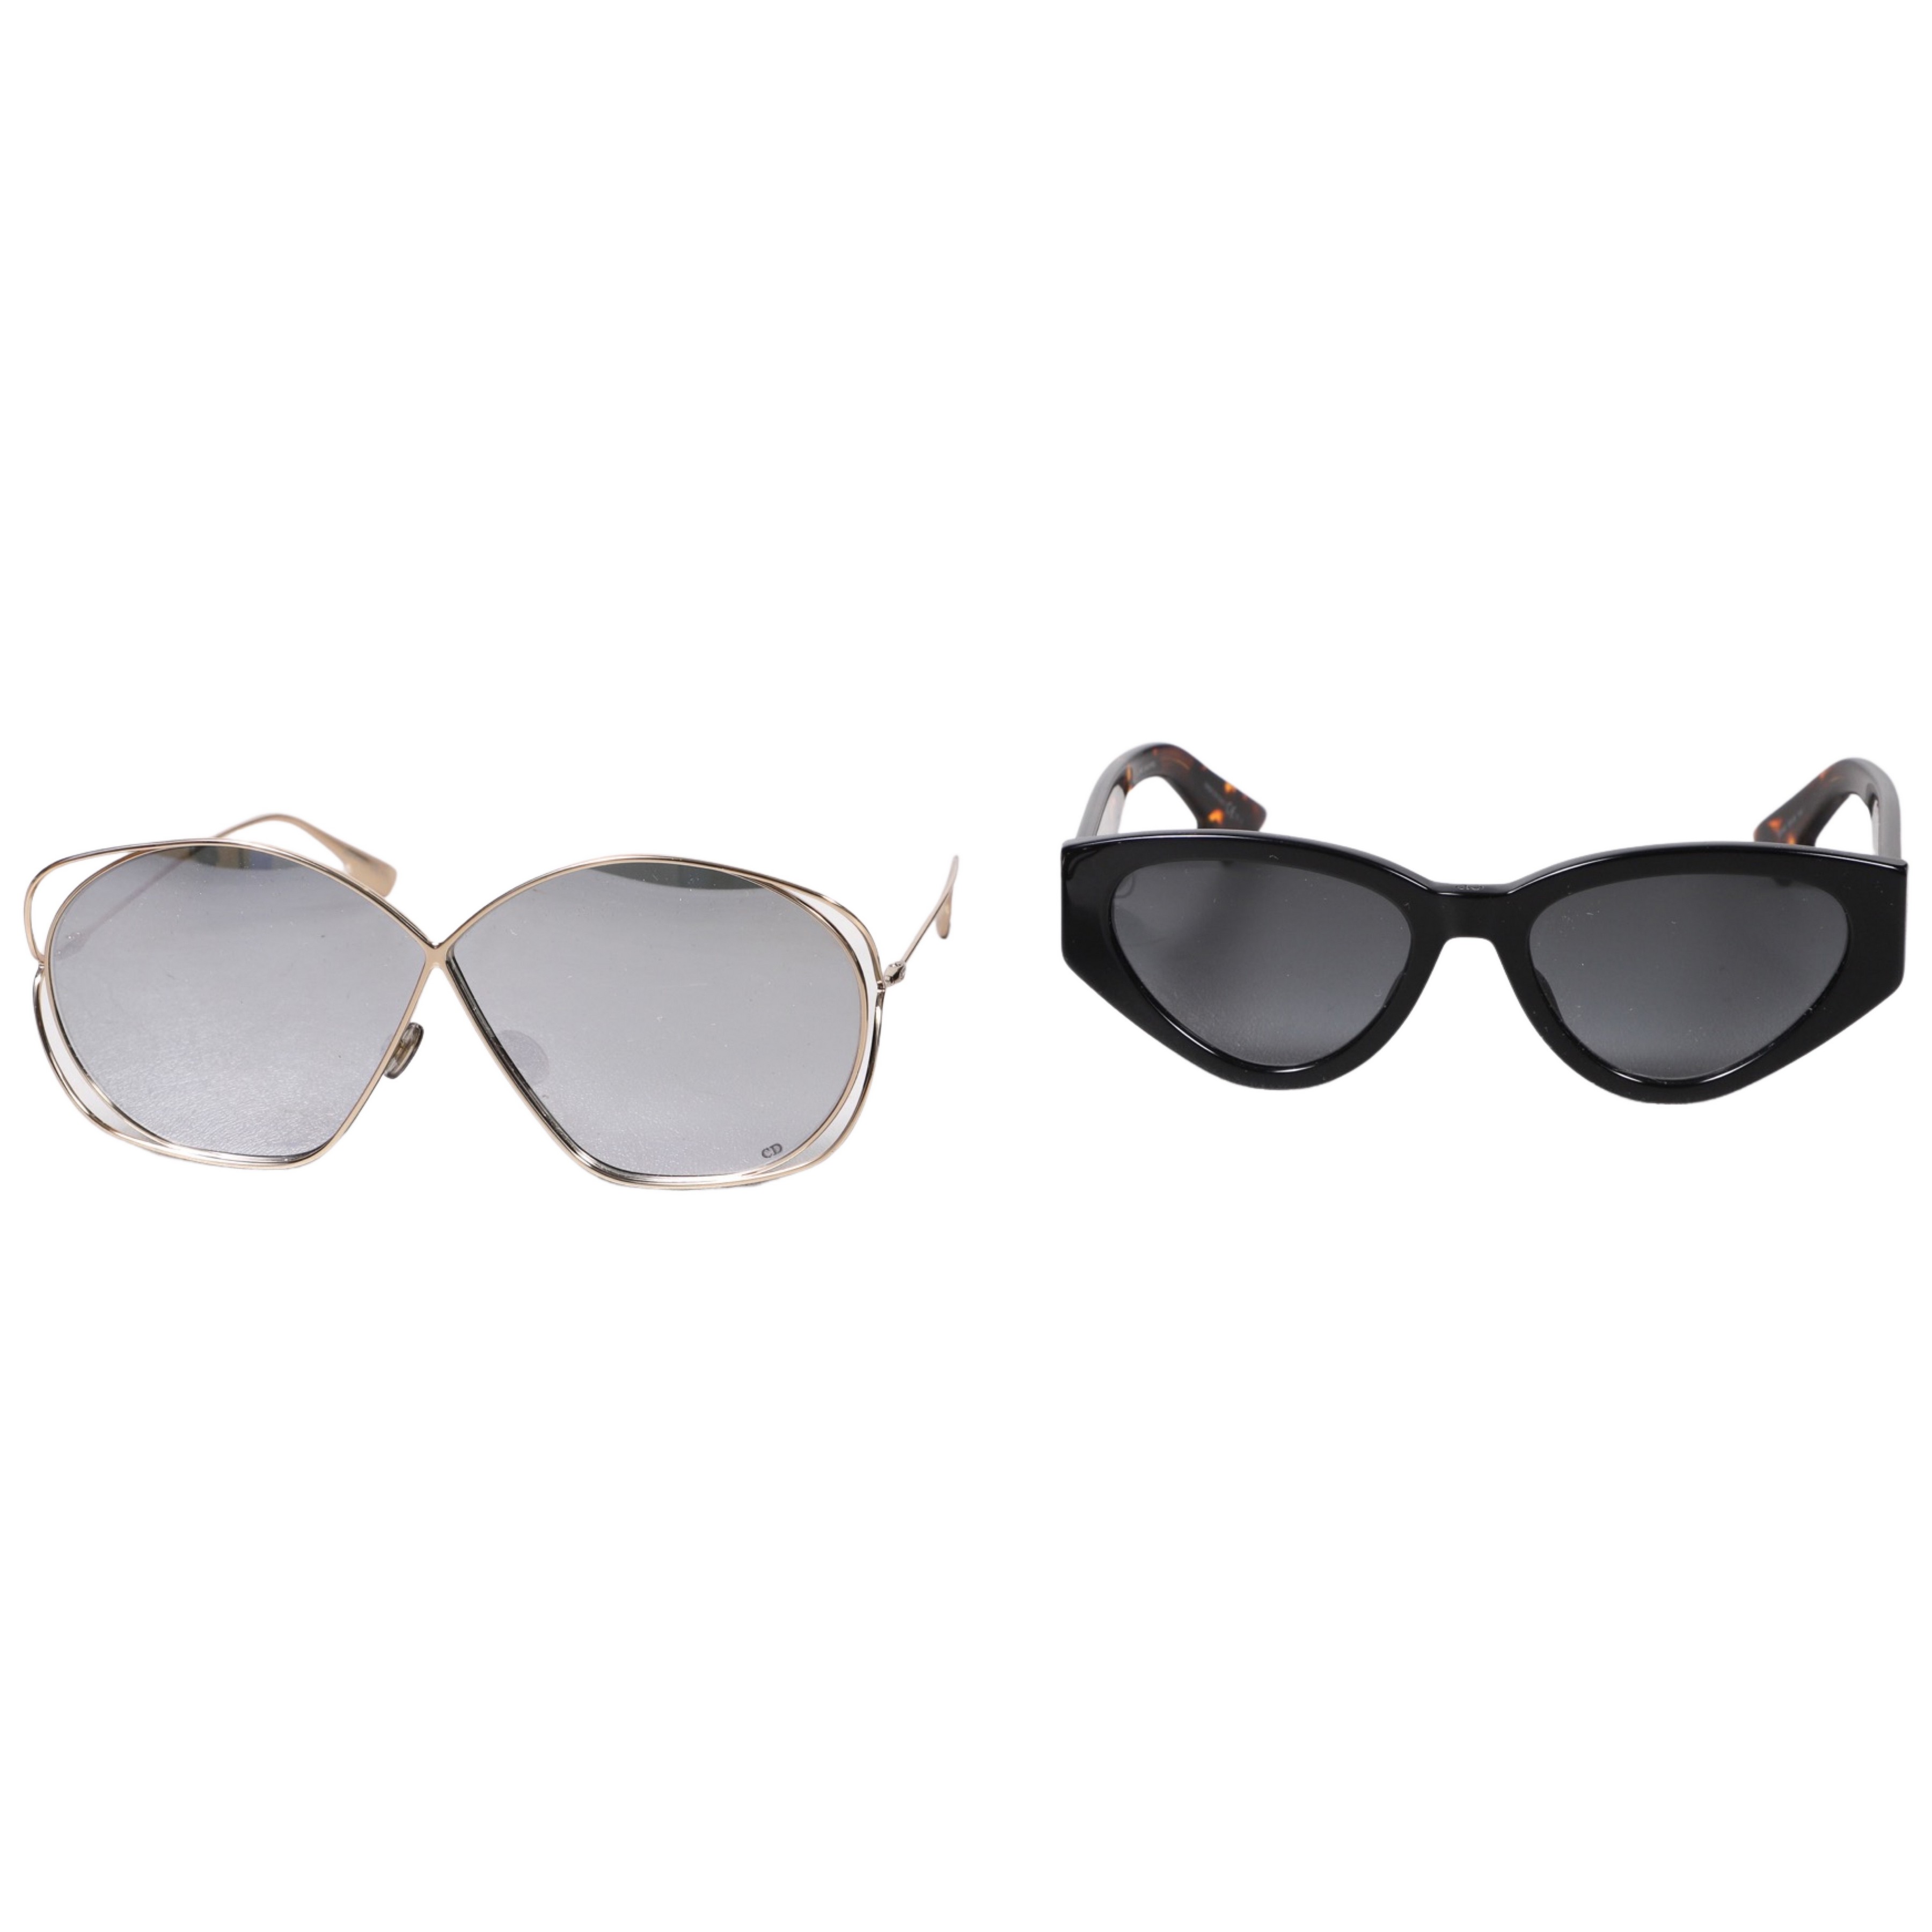 (2) Pairs Dior sunglasses to include